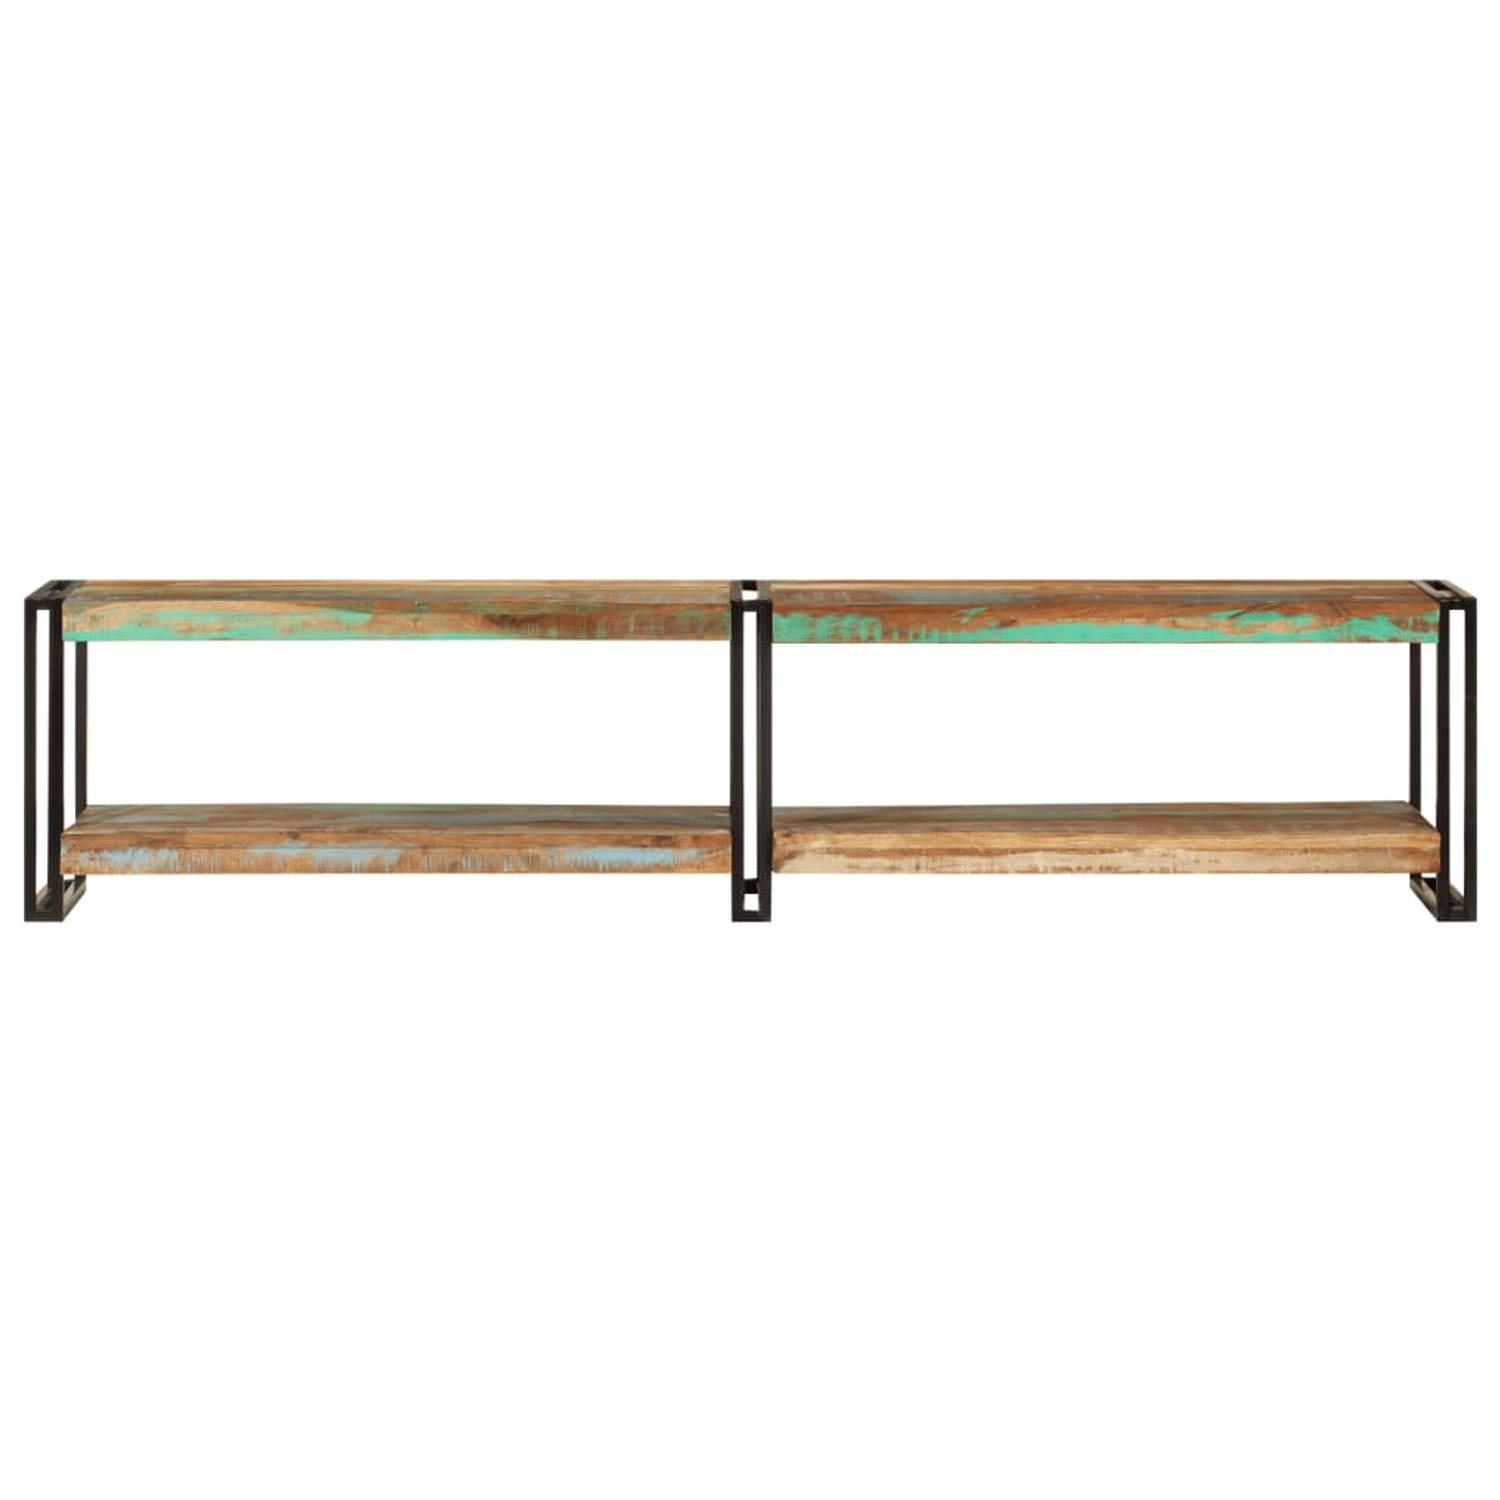 The Living Store TV-meubel massief gerecycled hout metalen frame 180 x 30 x 40 cm